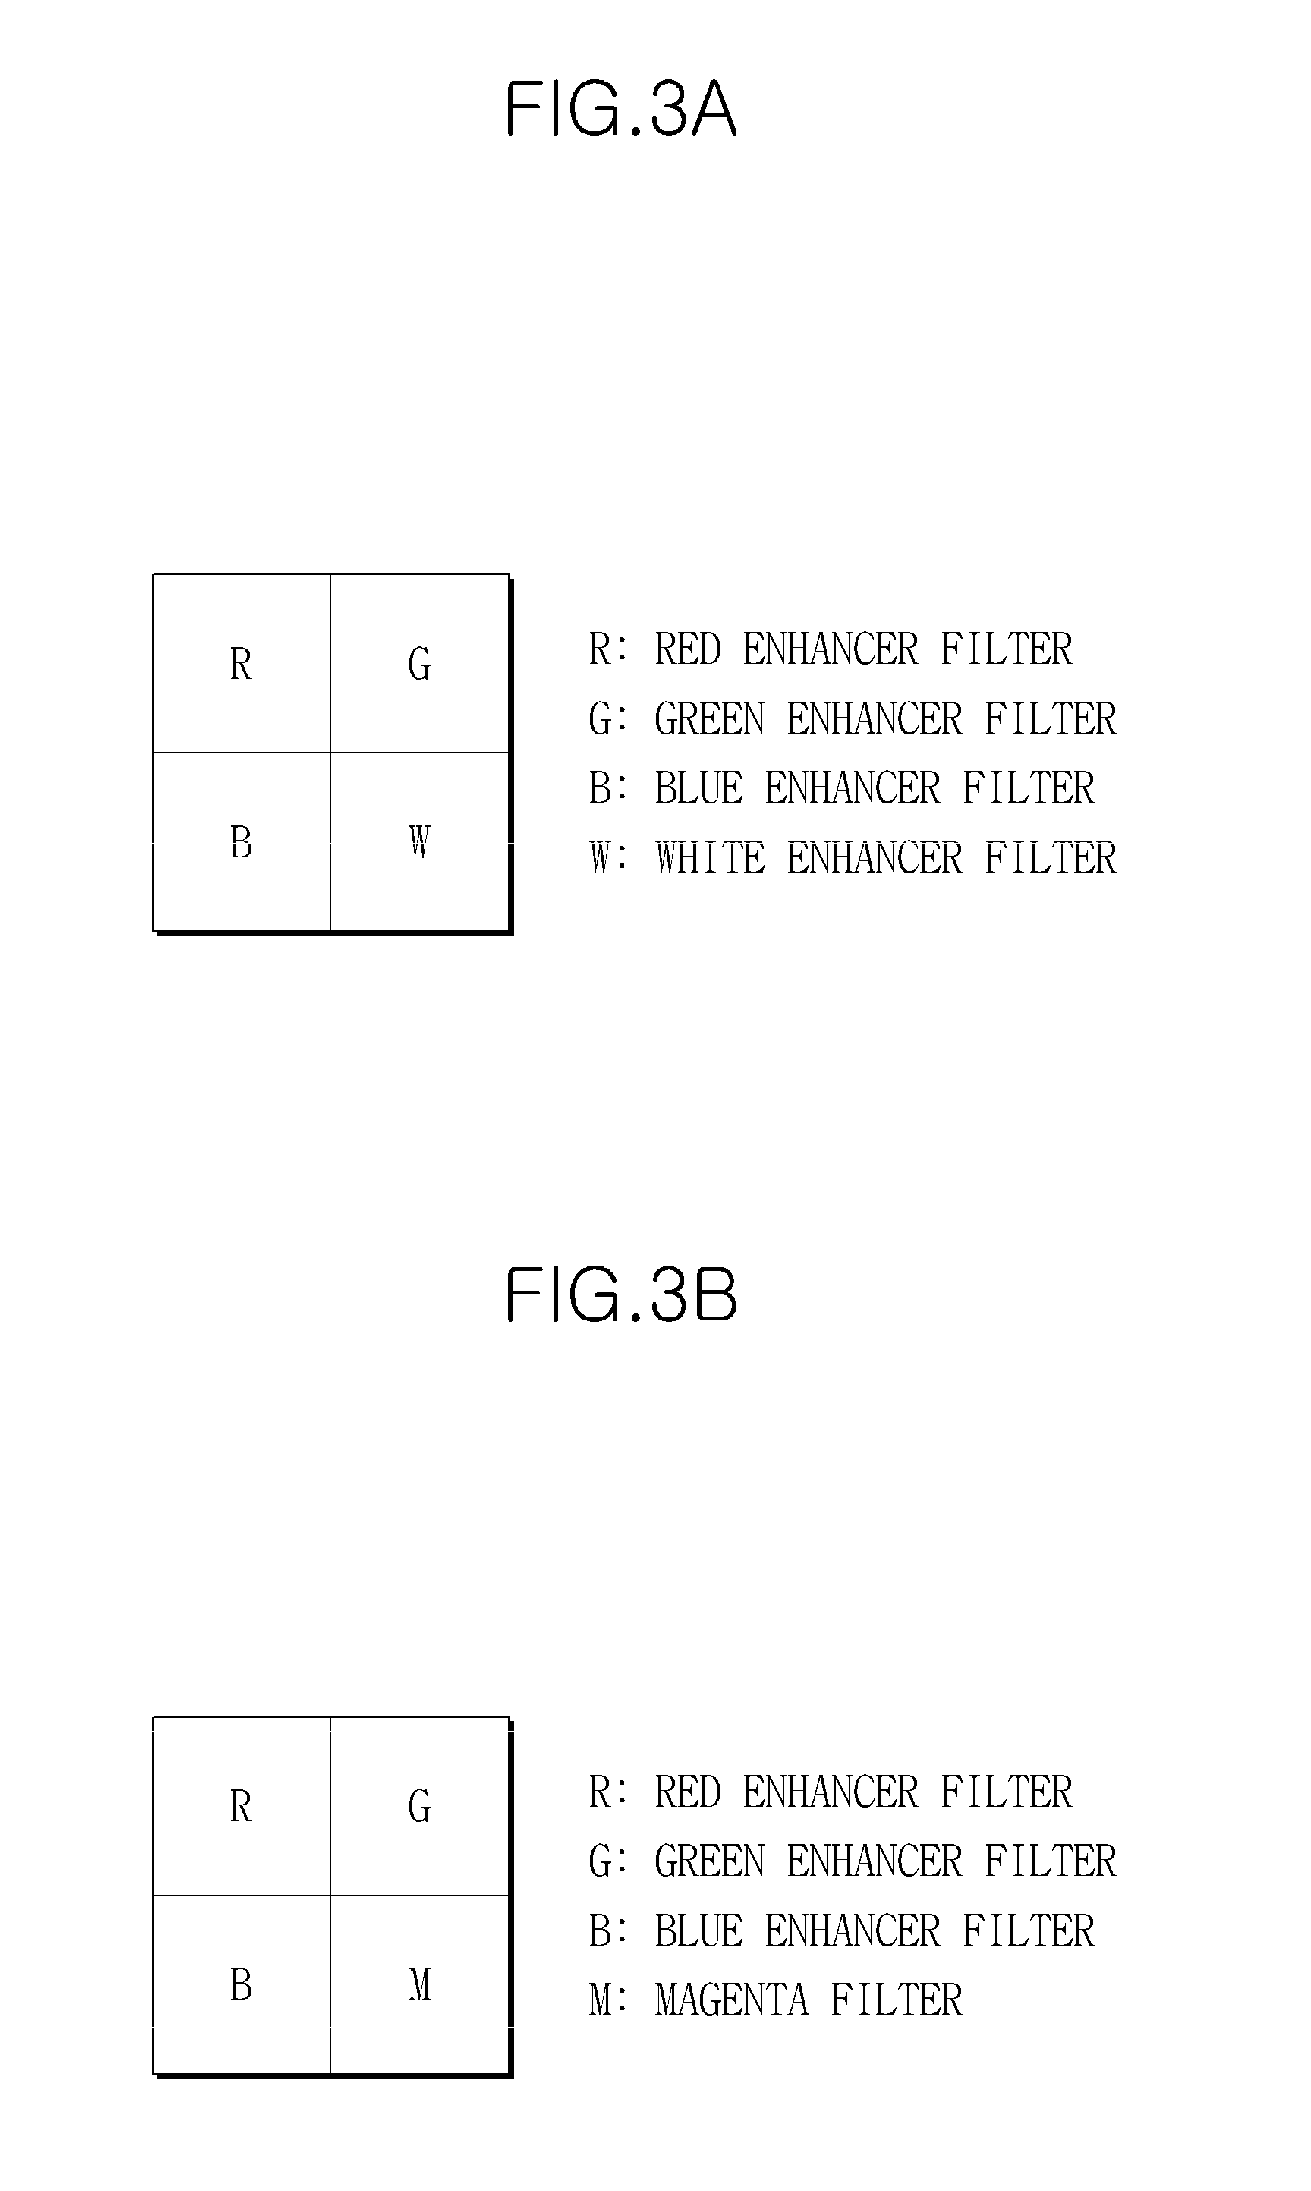 Image processing apparatus and method of providing high sensitive color images